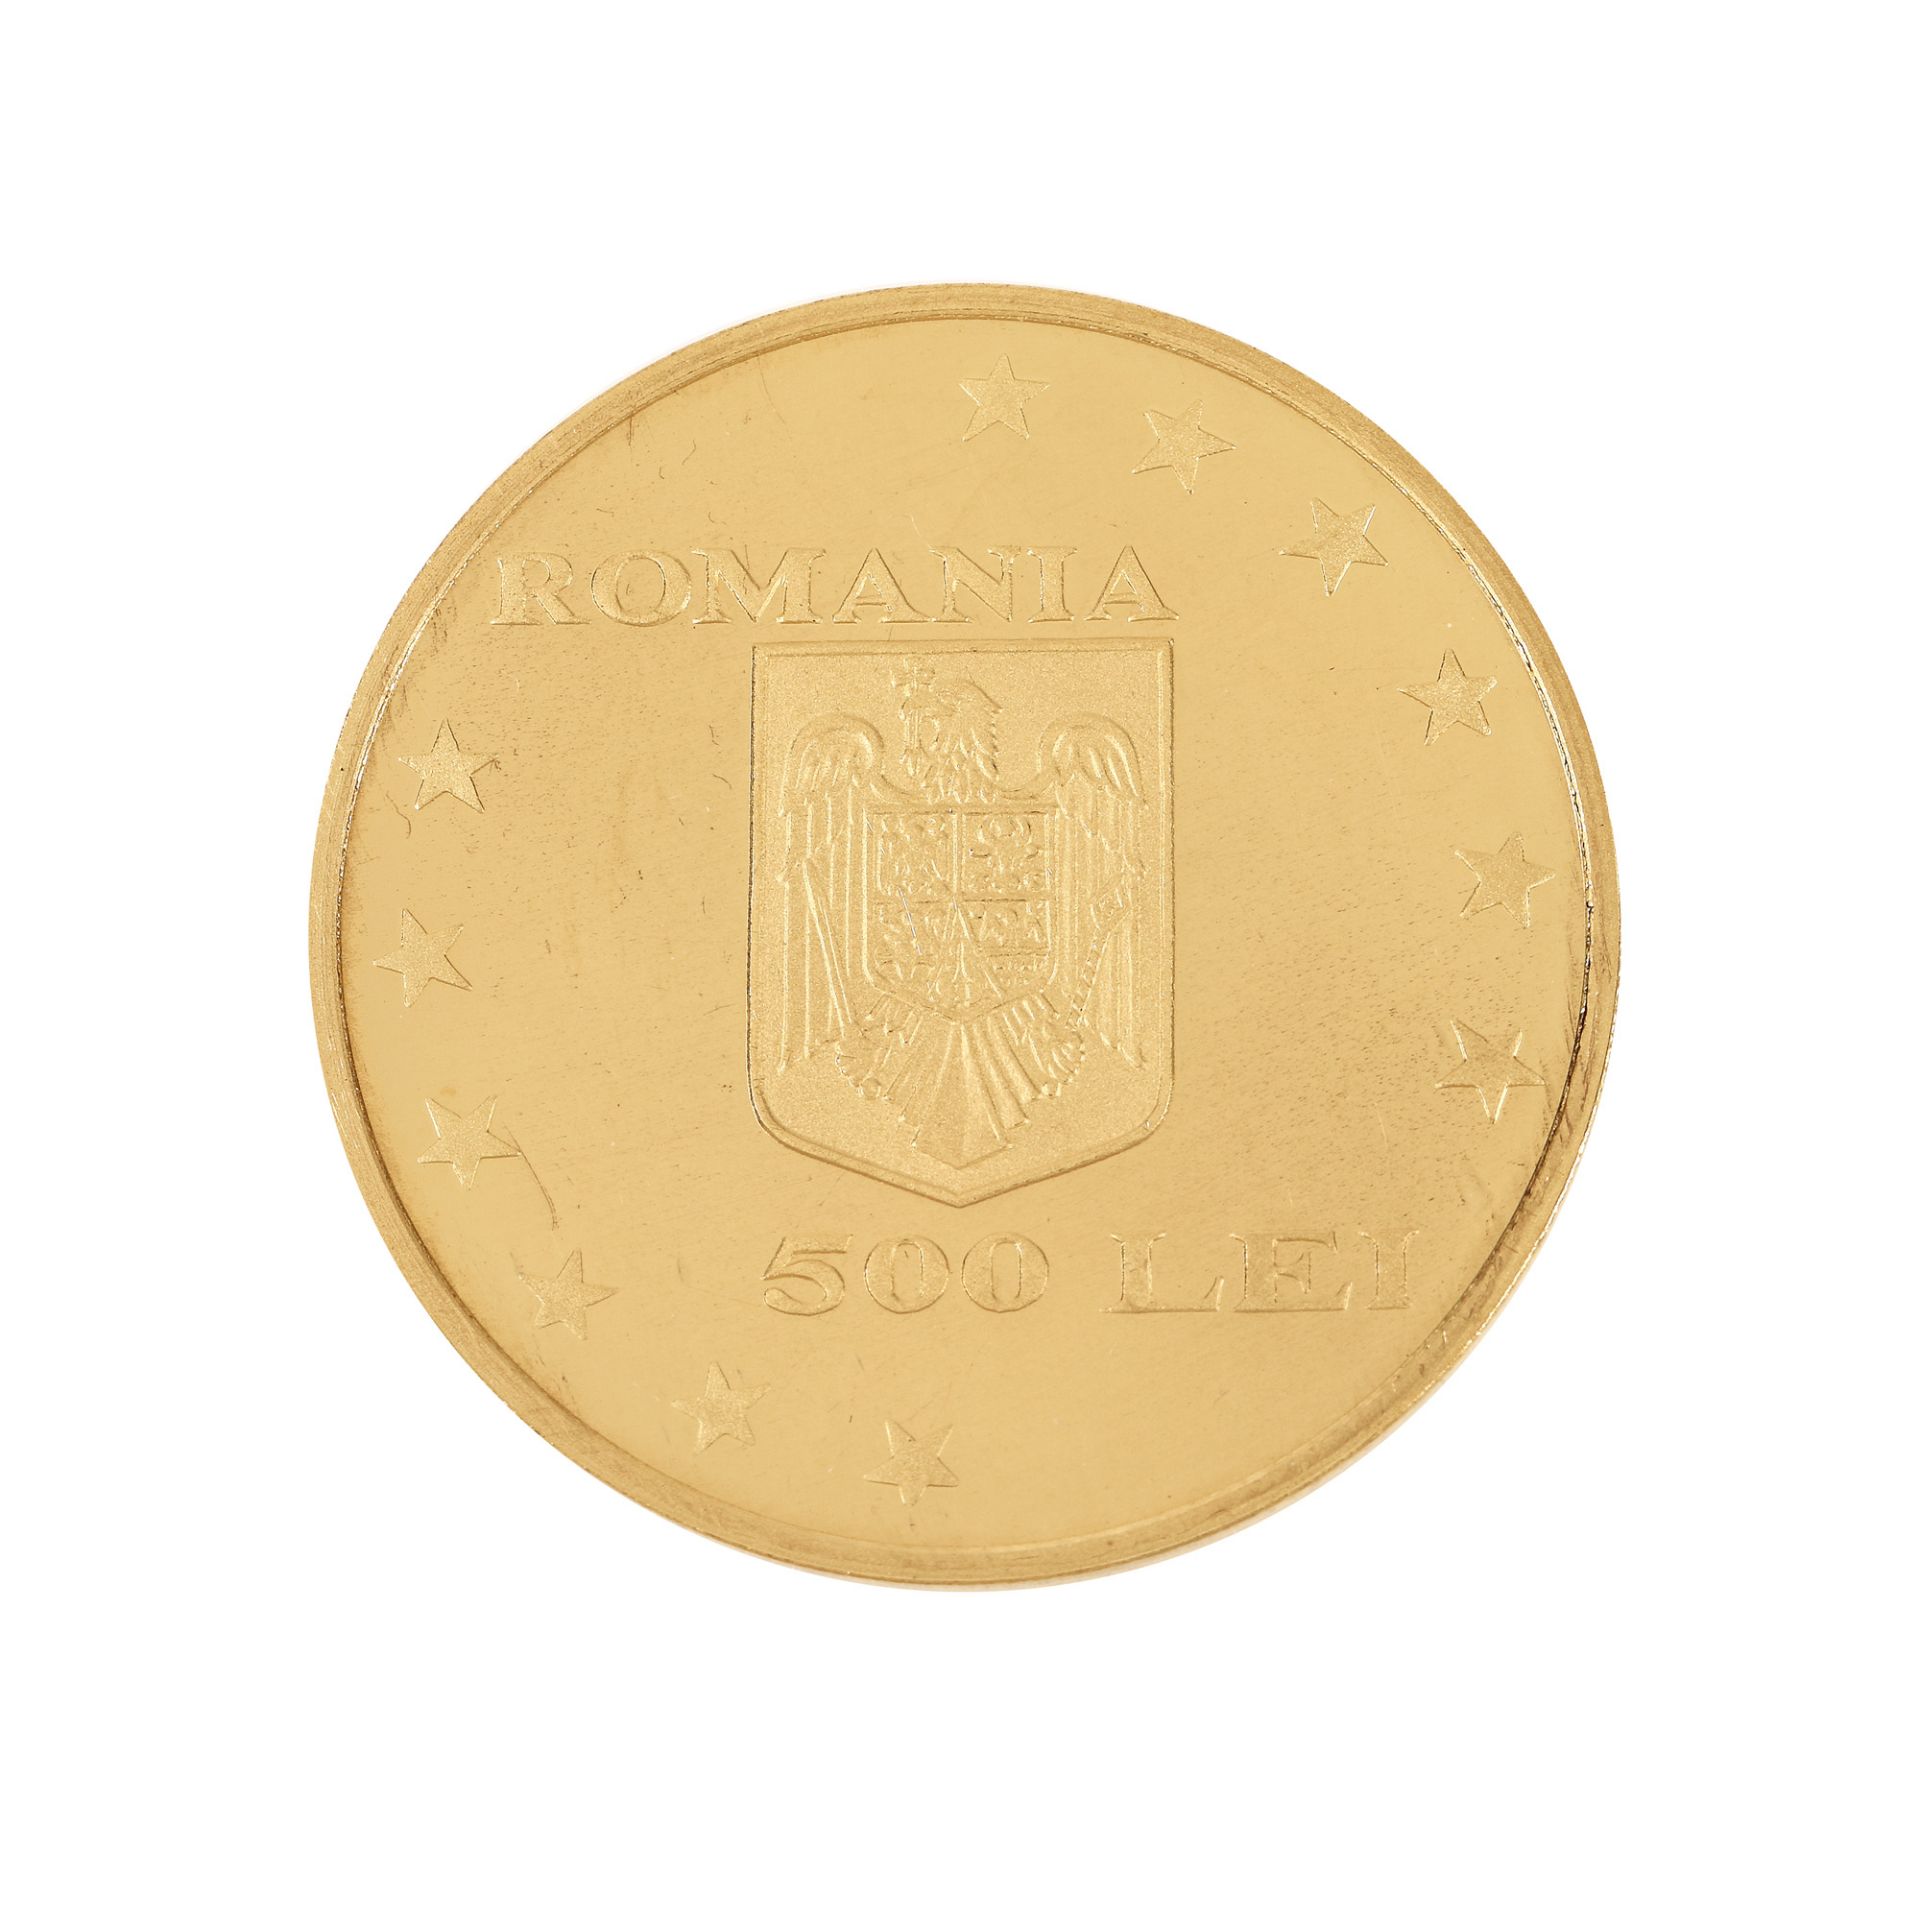 BNR commemorative coin, Accession to the European Union, 2007, gold - Image 2 of 2